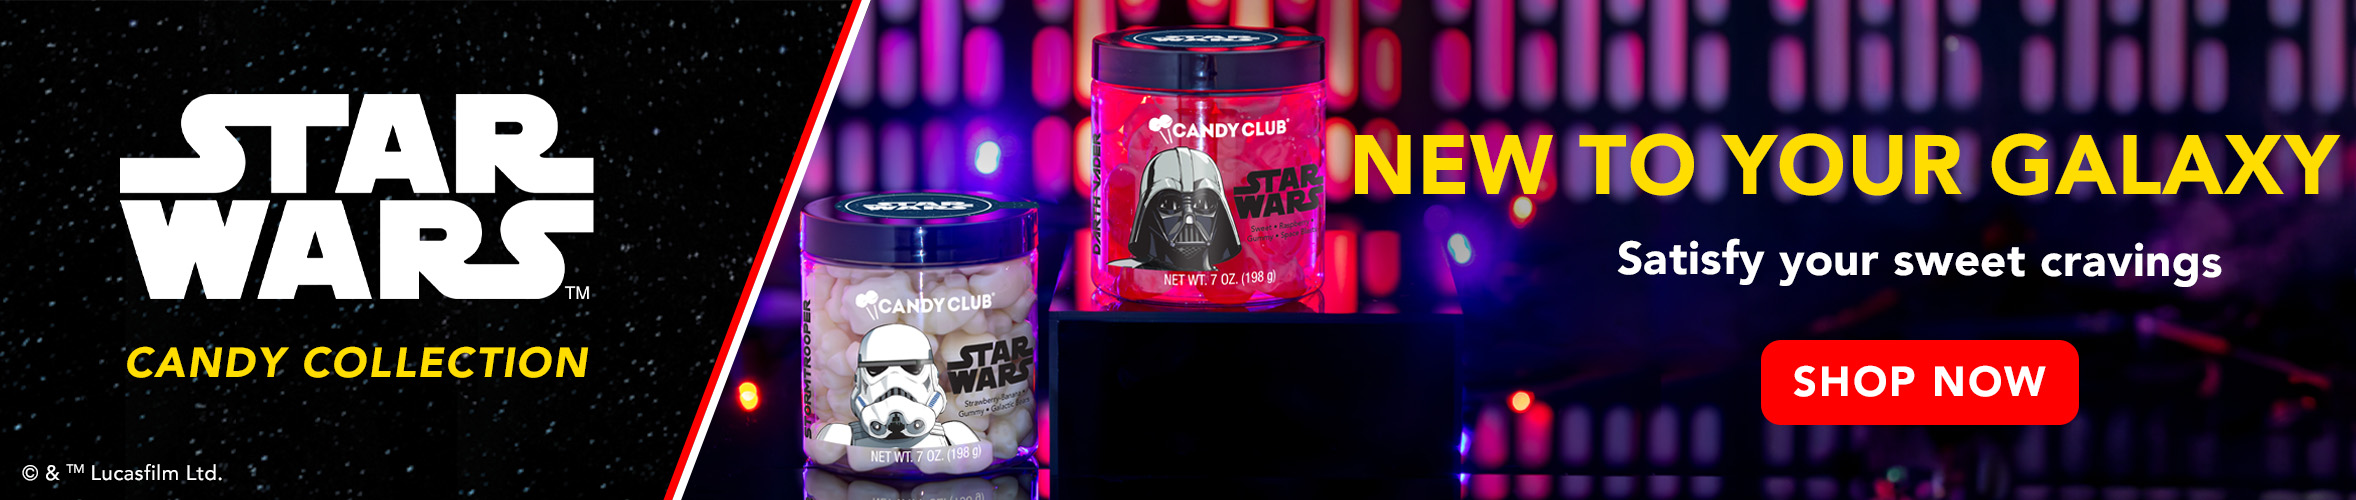 Star Wars Candy Collection. New To Your Galaxy. Shop Now.